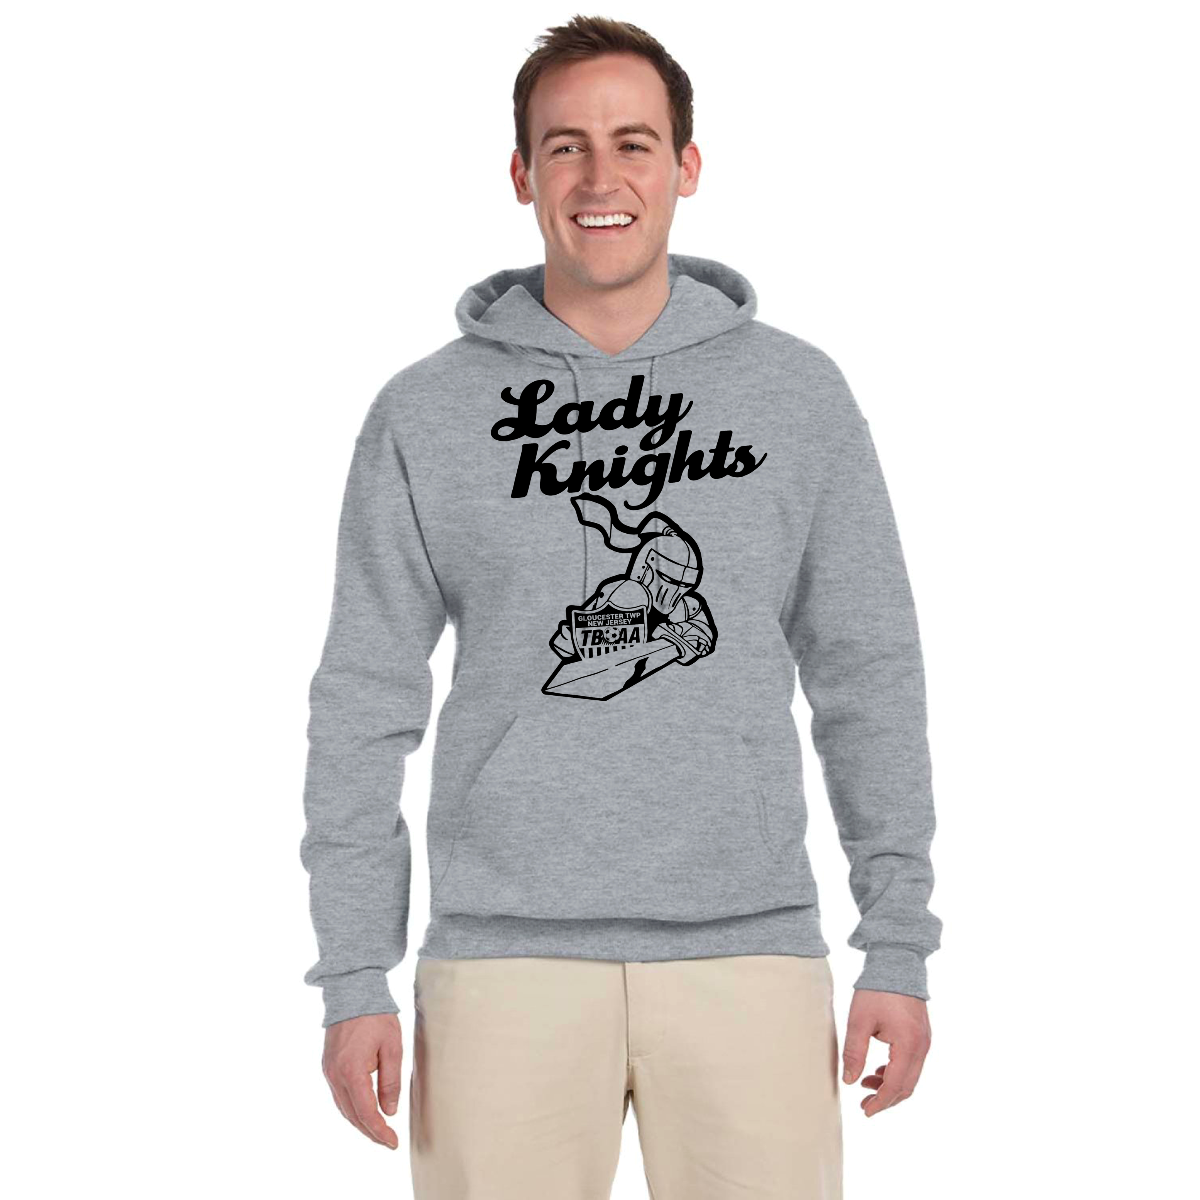 LADYKNIGHTS Athletic Heather Hoodie with Black image